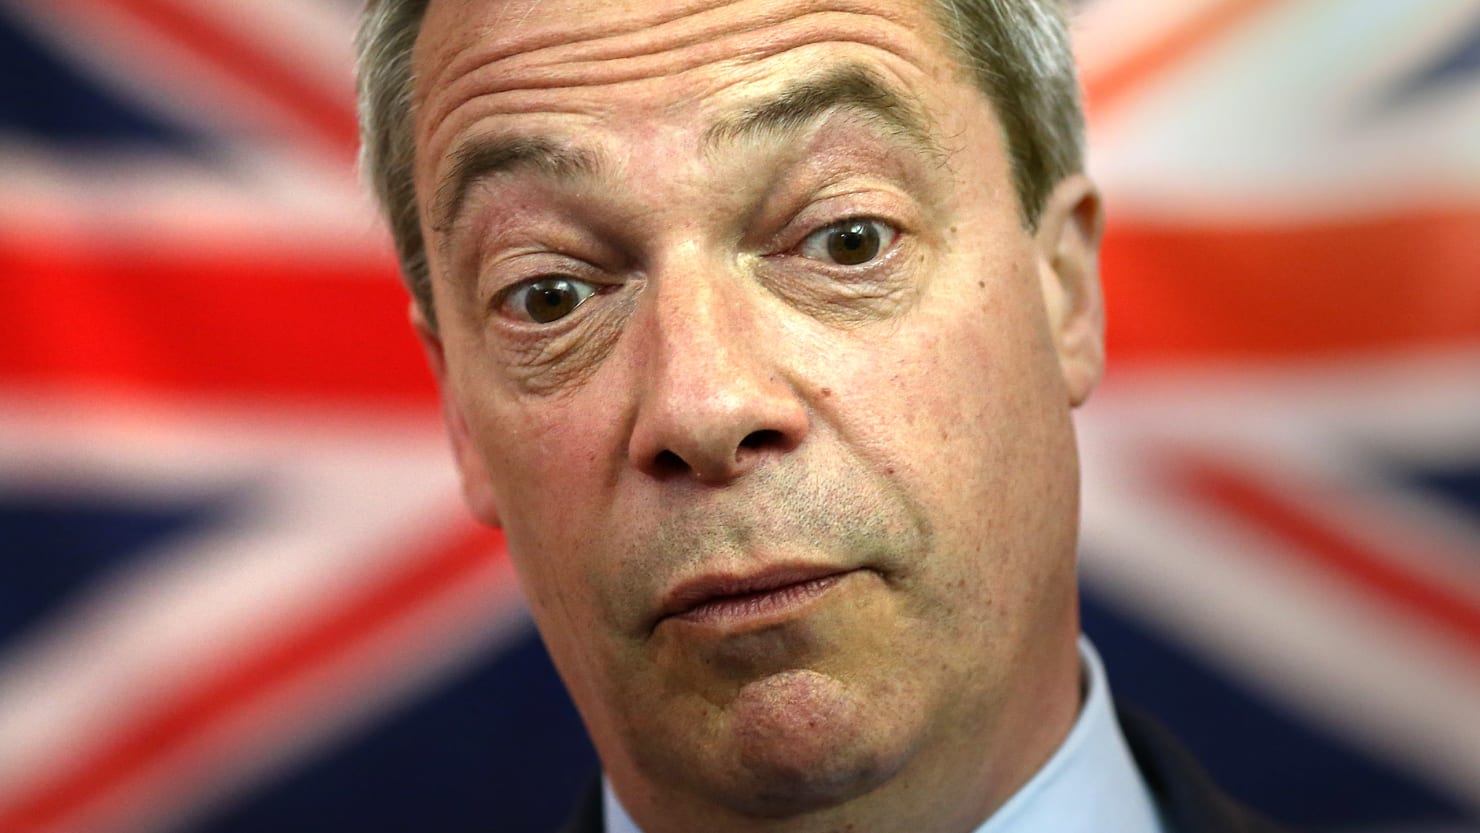 Brexit Leader Nigel Farage Admits Britain May Need A Second Referendum